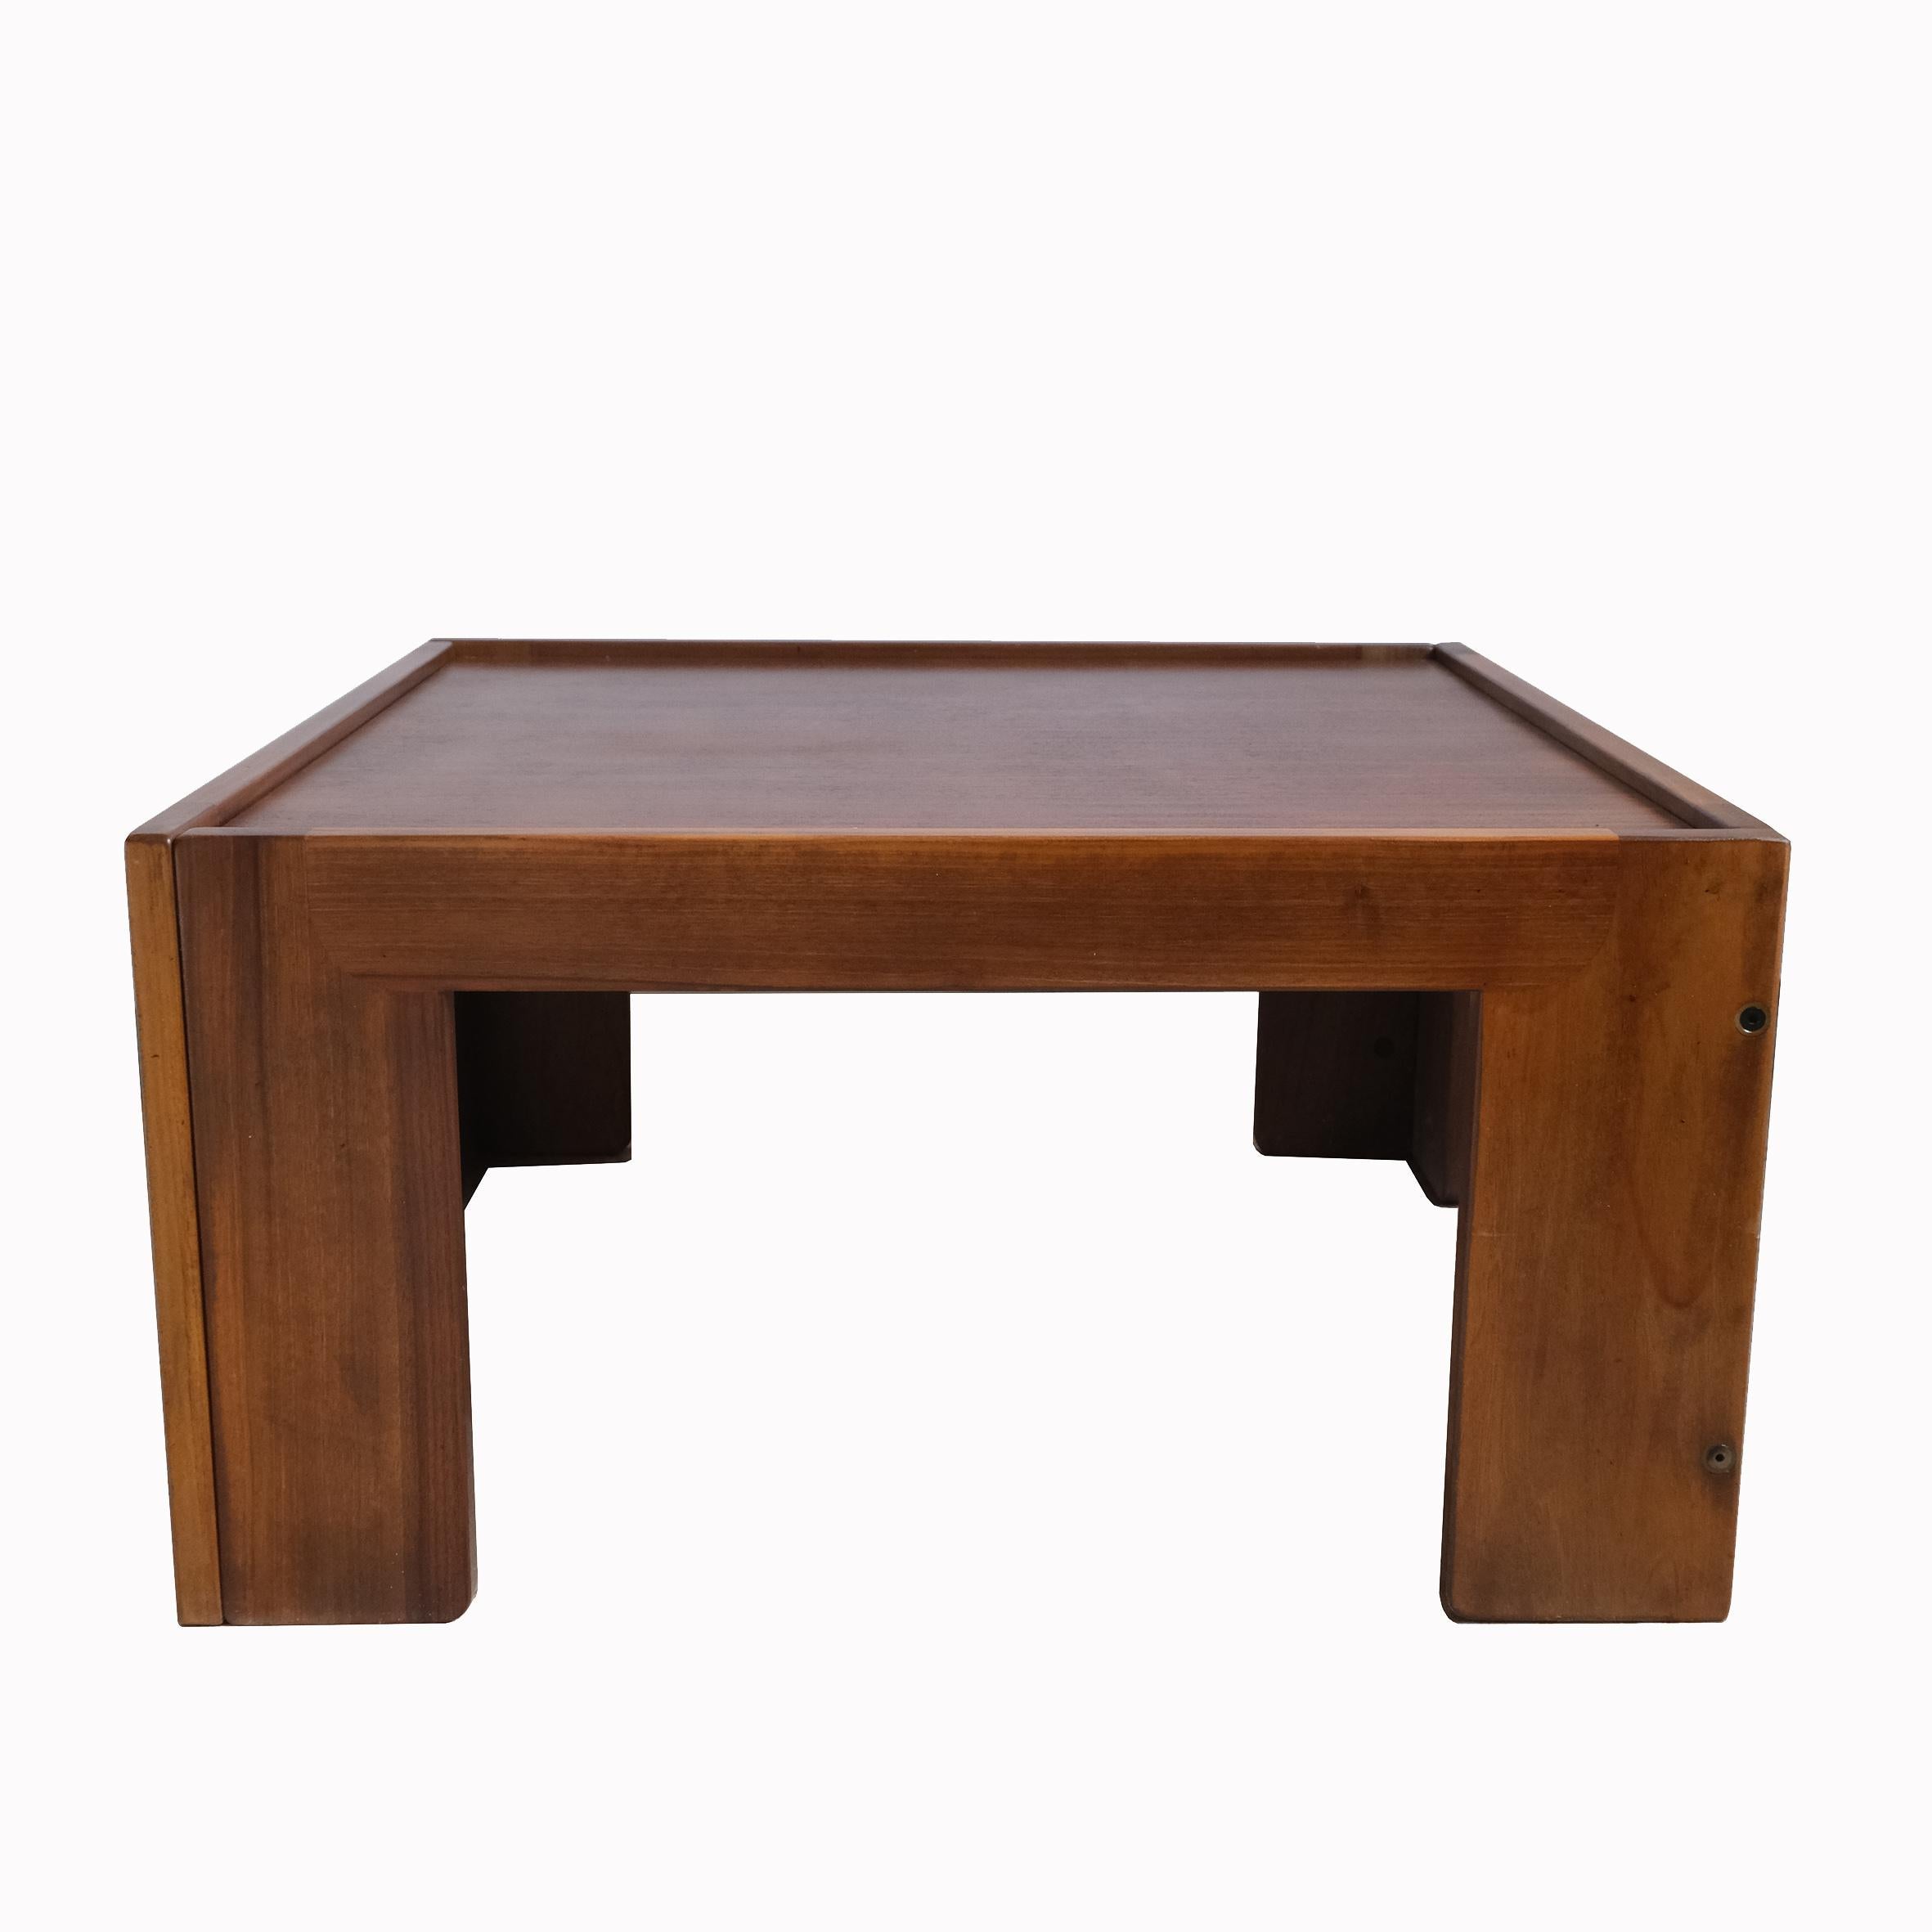 A square walnut low table, the top plate rested on the frame supported by four rectangular feet.
With 